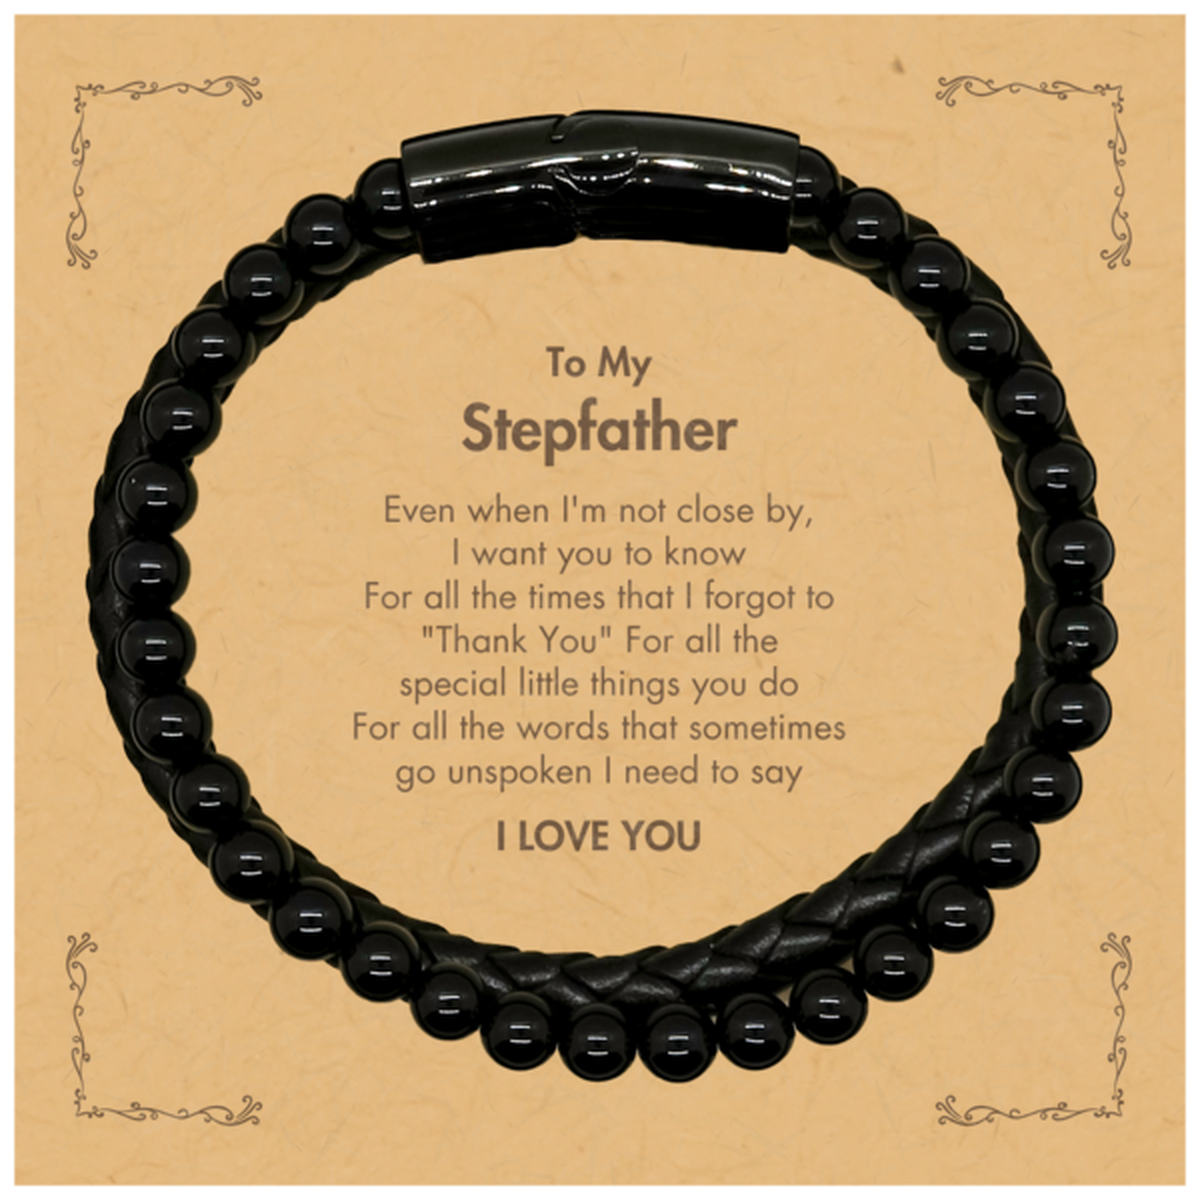 Thank You Gifts for Stepfather, Keepsake Stone Leather Bracelets Gifts for Stepfather Birthday Mother's day Father's Day Stepfather For all the words That sometimes go unspoken I need to say I LOVE YOU